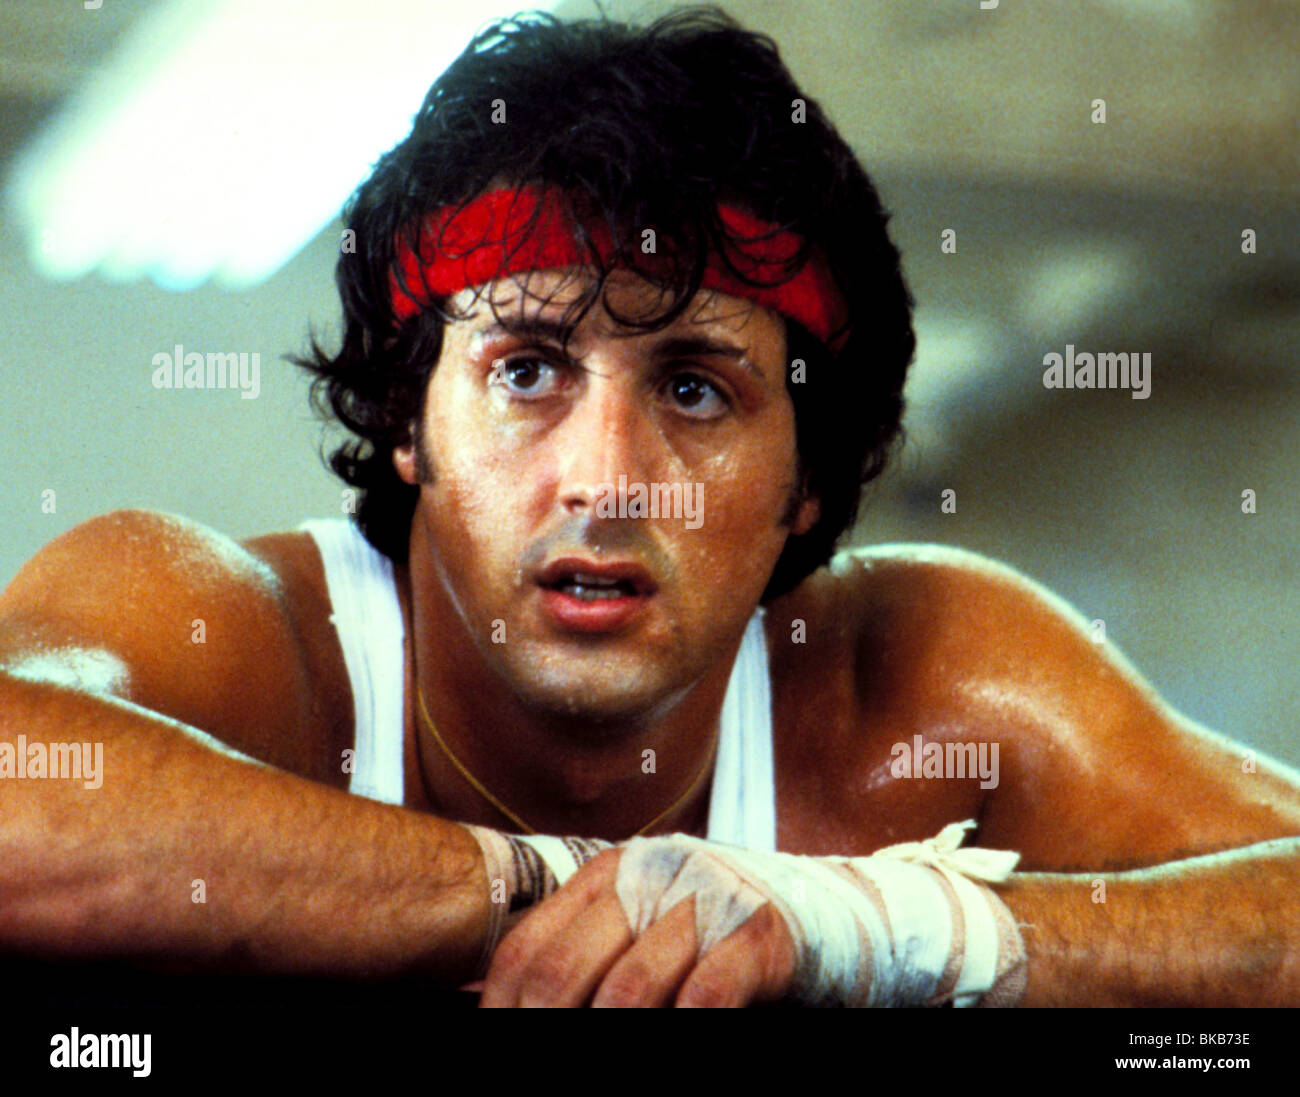 ROCKY II (1979), Sylvester Stallone RK2 002OS Banque D'Images